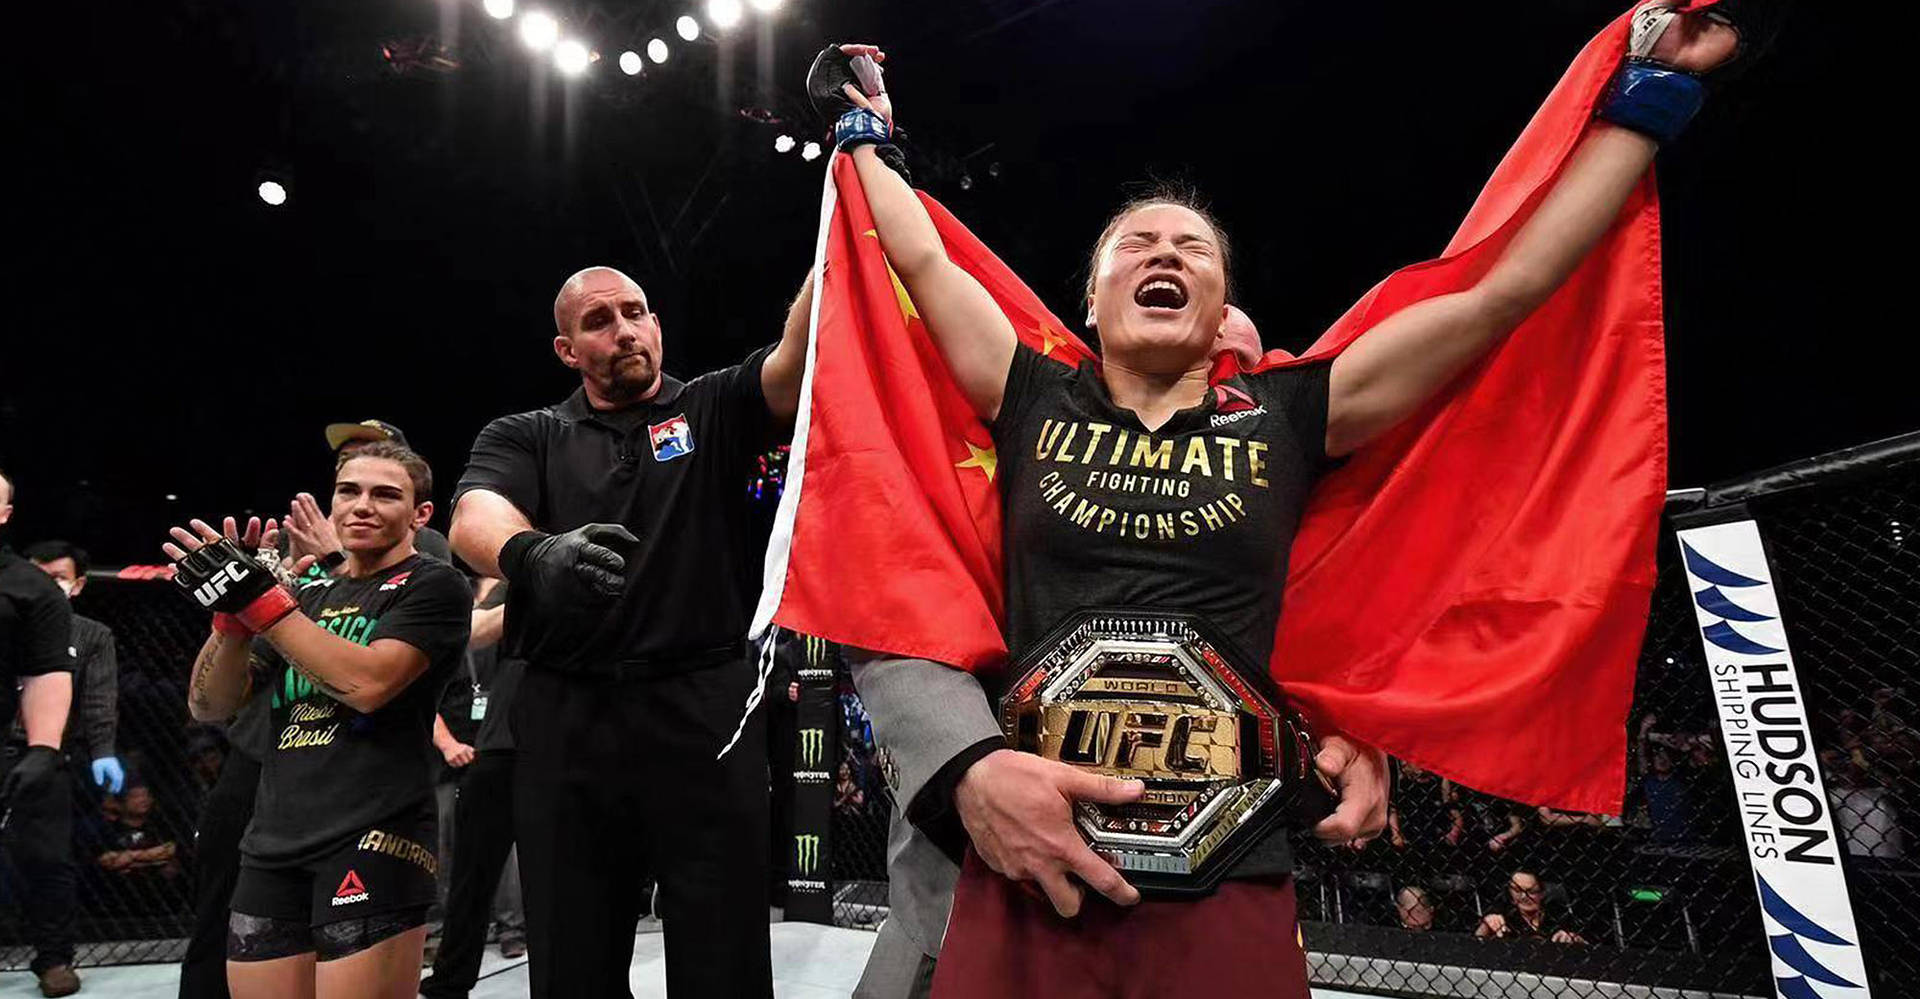 Champion Zhang Weili proudly displaying her UFC belt. Wallpaper